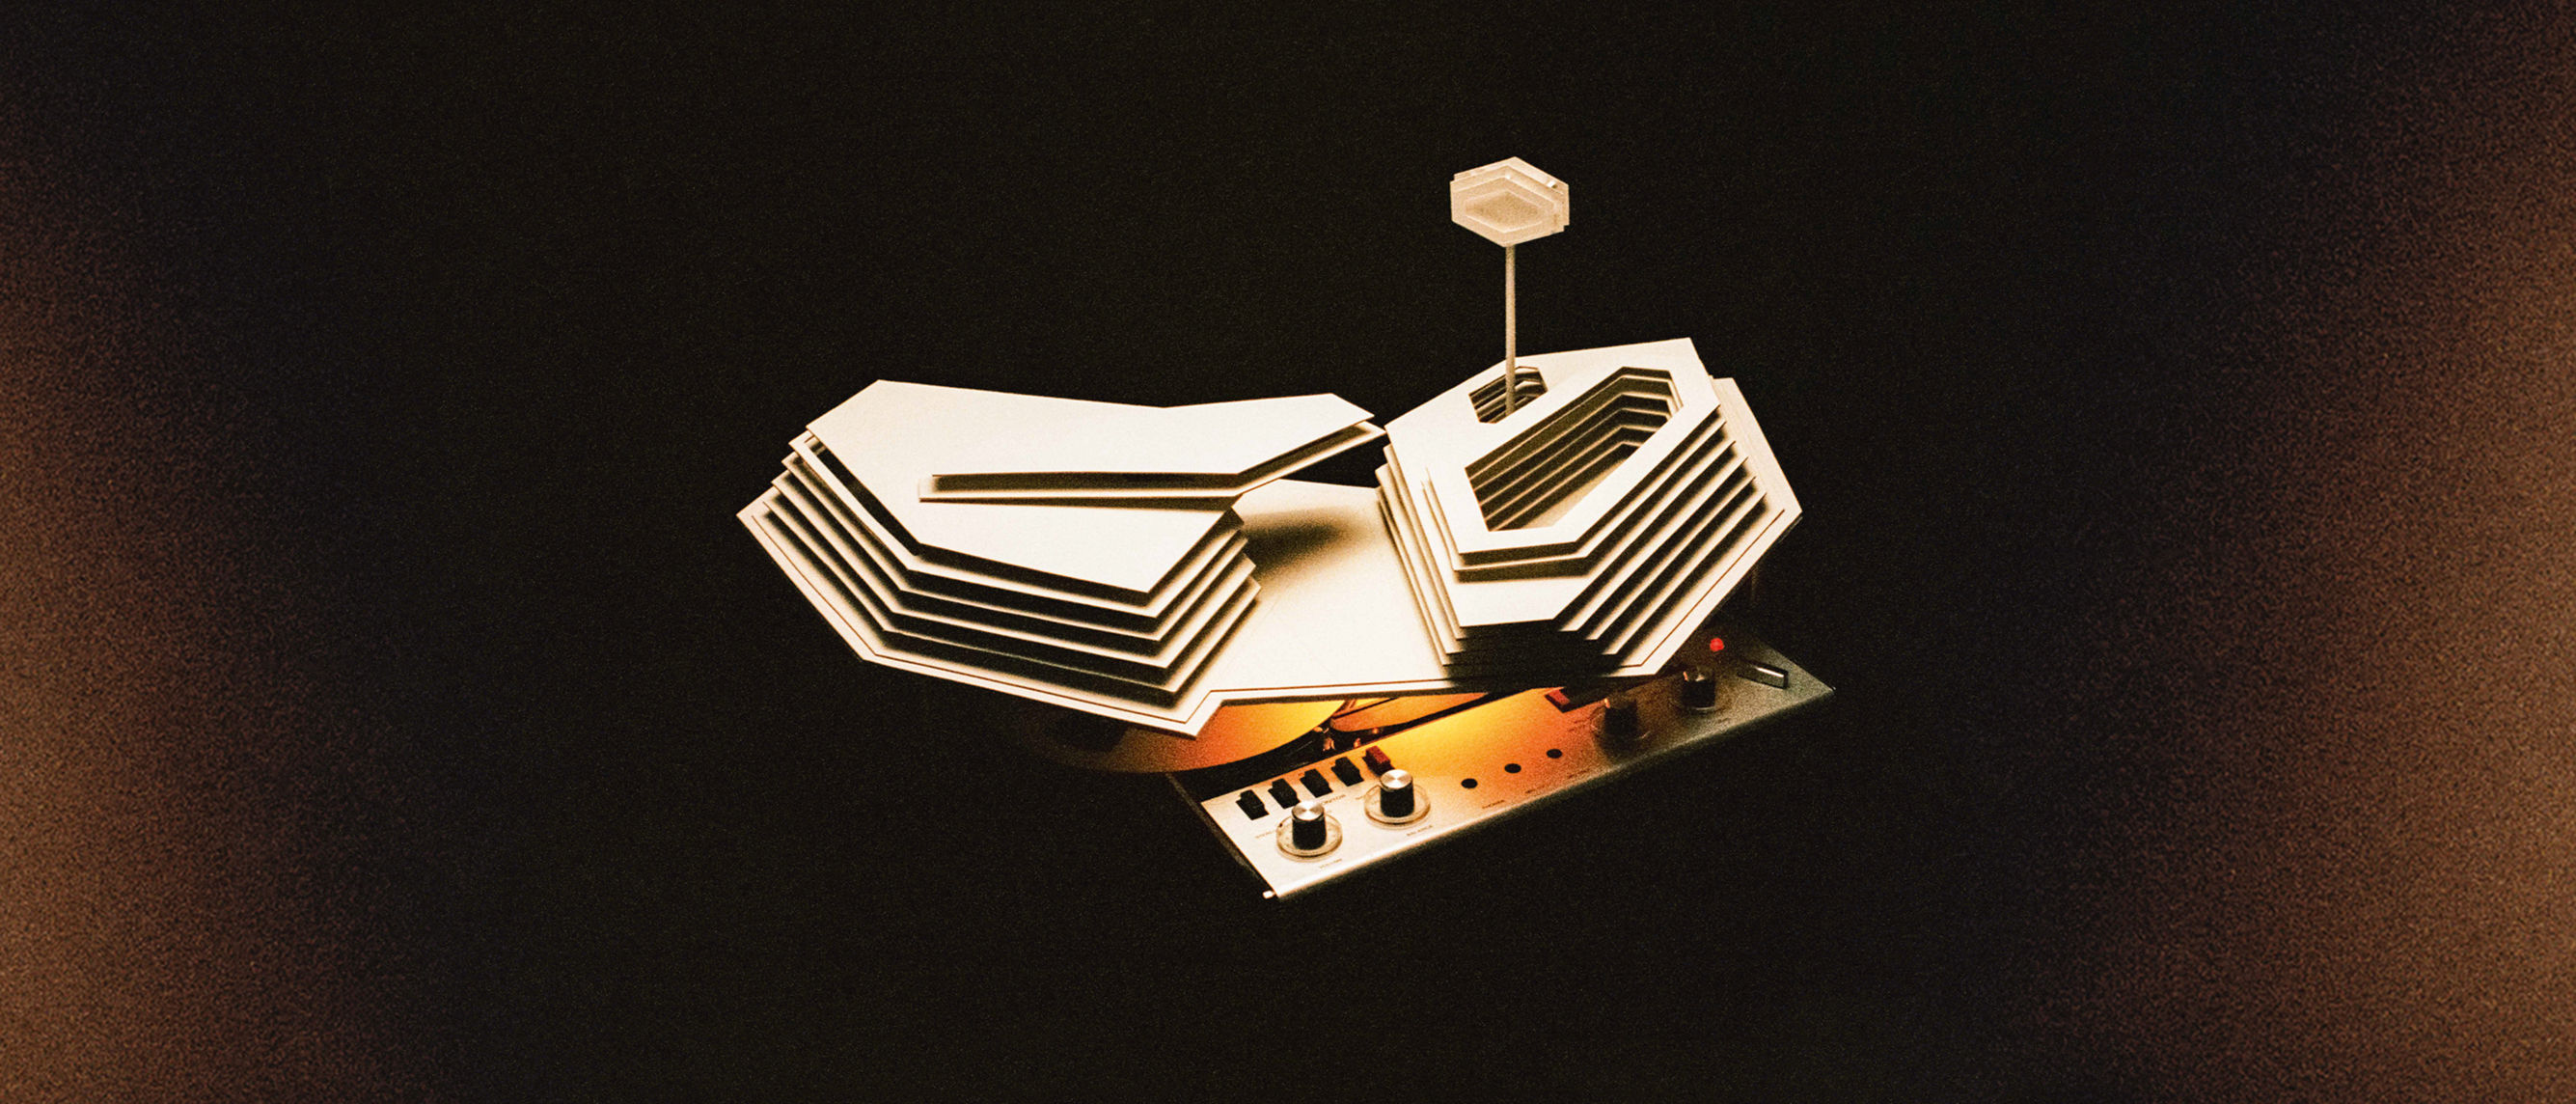 Tranquility Base Hotel and Casino.